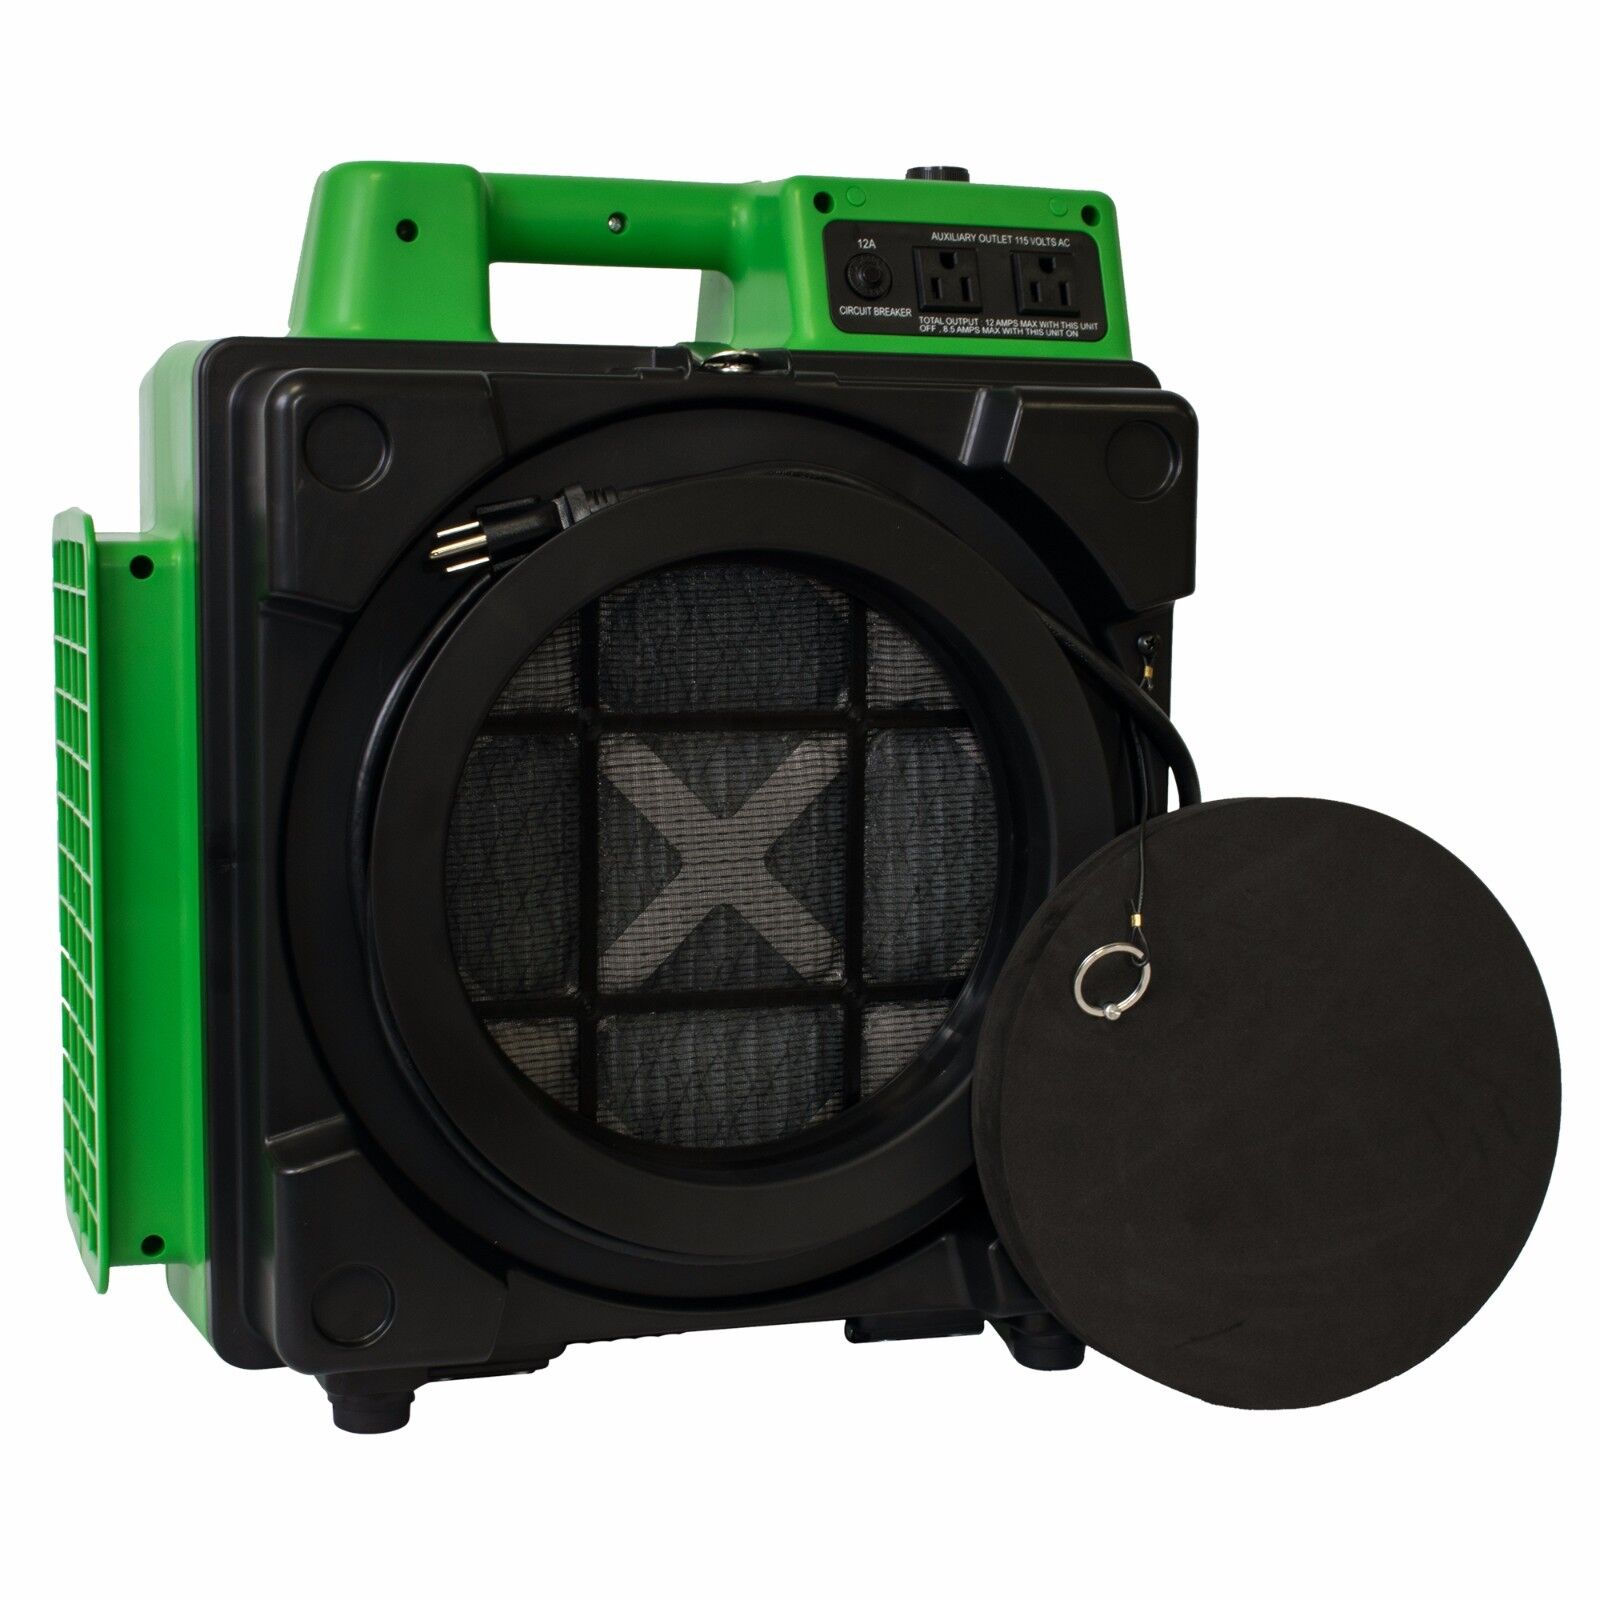 XPOWER X-2480A 5-Speed,3-Stage HEPA Filtration Mini Air Scrubber Purifier-Green